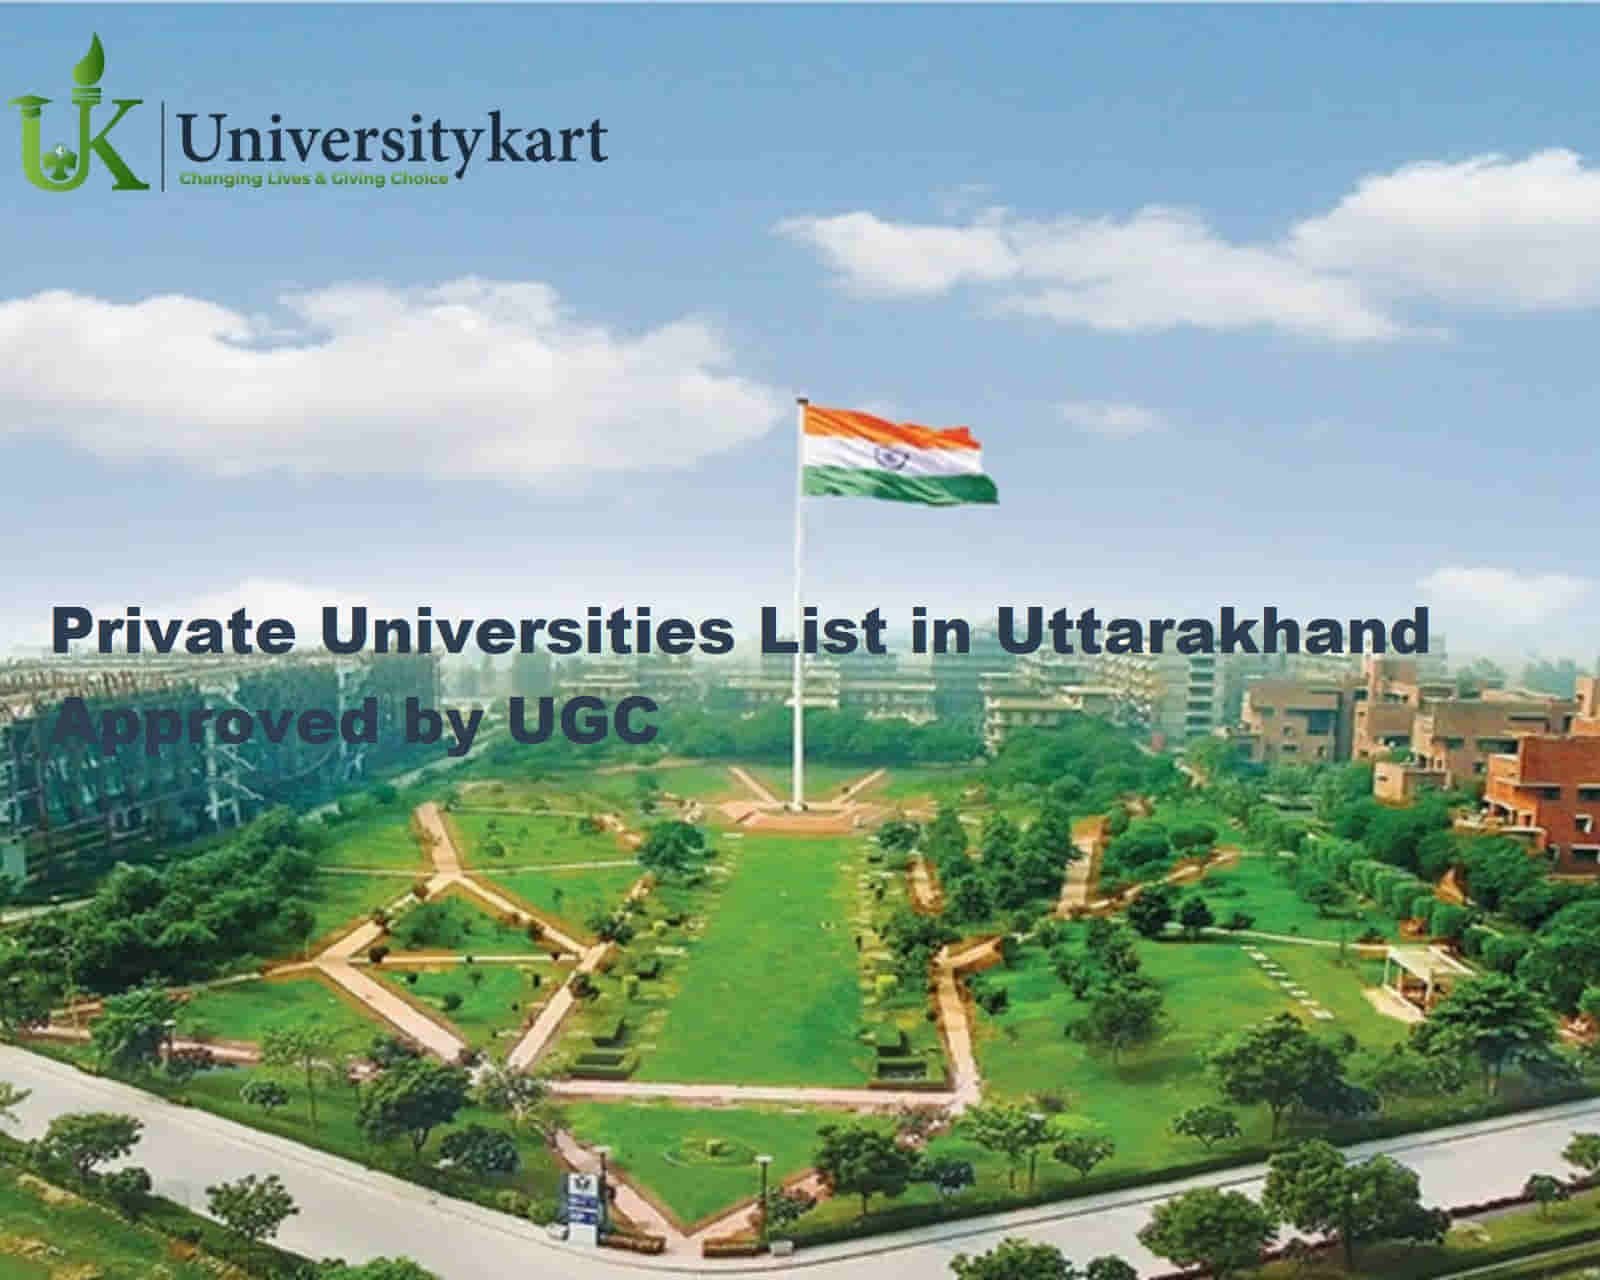 Private Universities List in Uttarakhand Approved by UGC